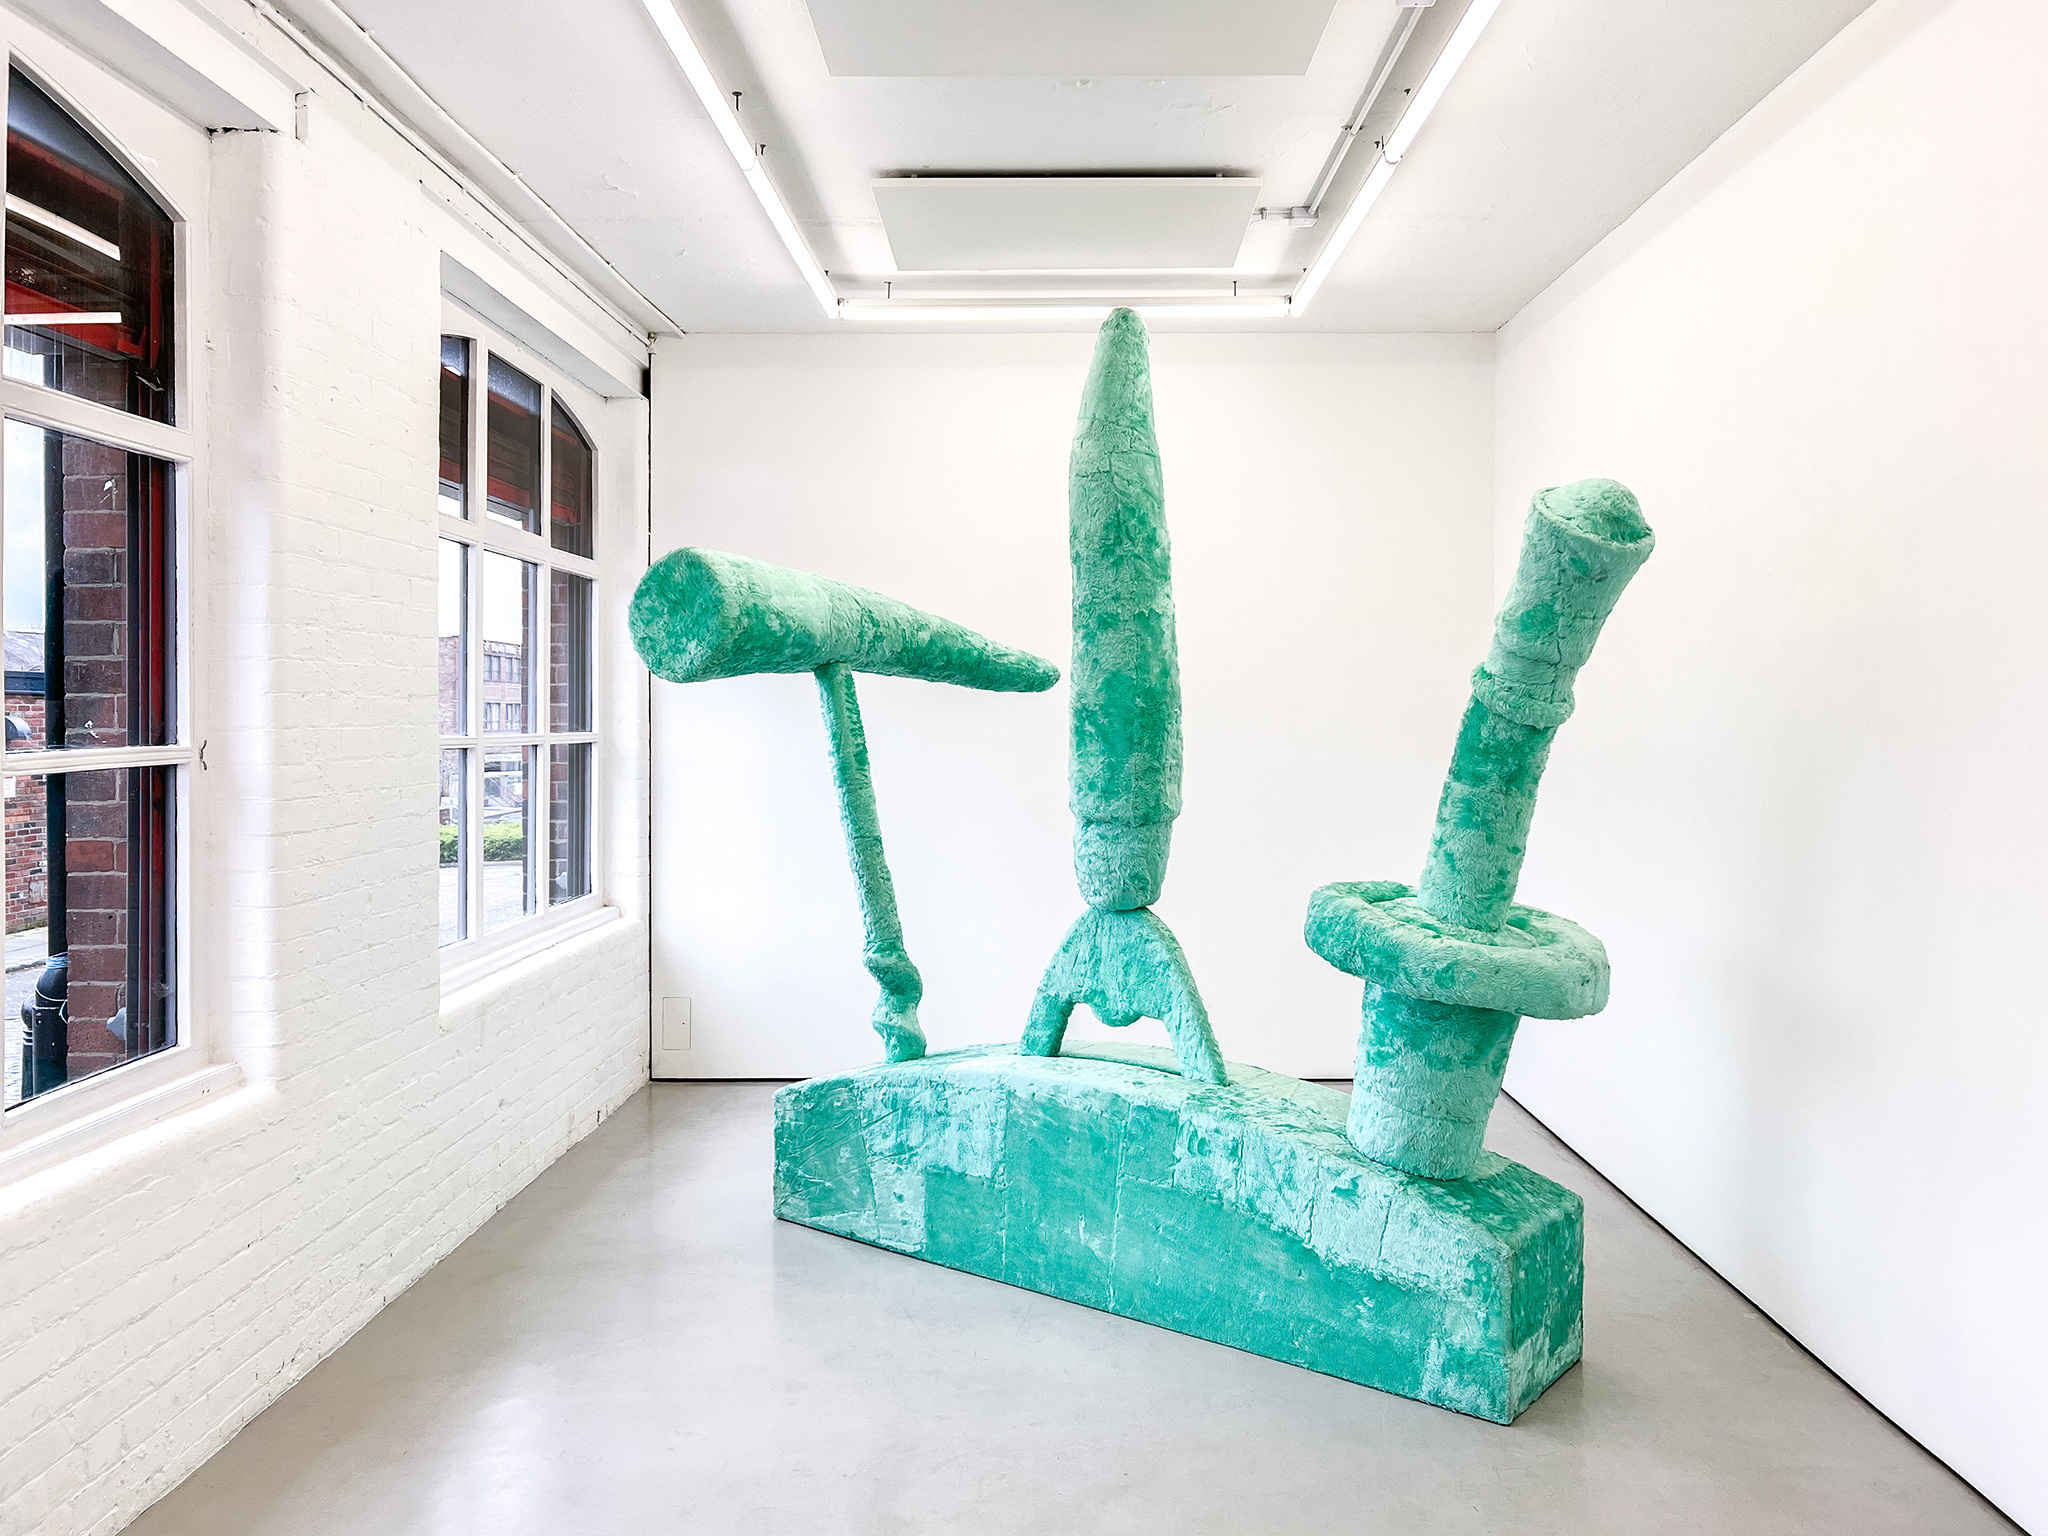 Eric Bainbridge, Made in Hong Kong, 1987, fur fabric, plaster, timber and steel, 276.9 x 320 x 170.2 cms Photography by Workplace. Courtesy of the Artist and Workplace, UK